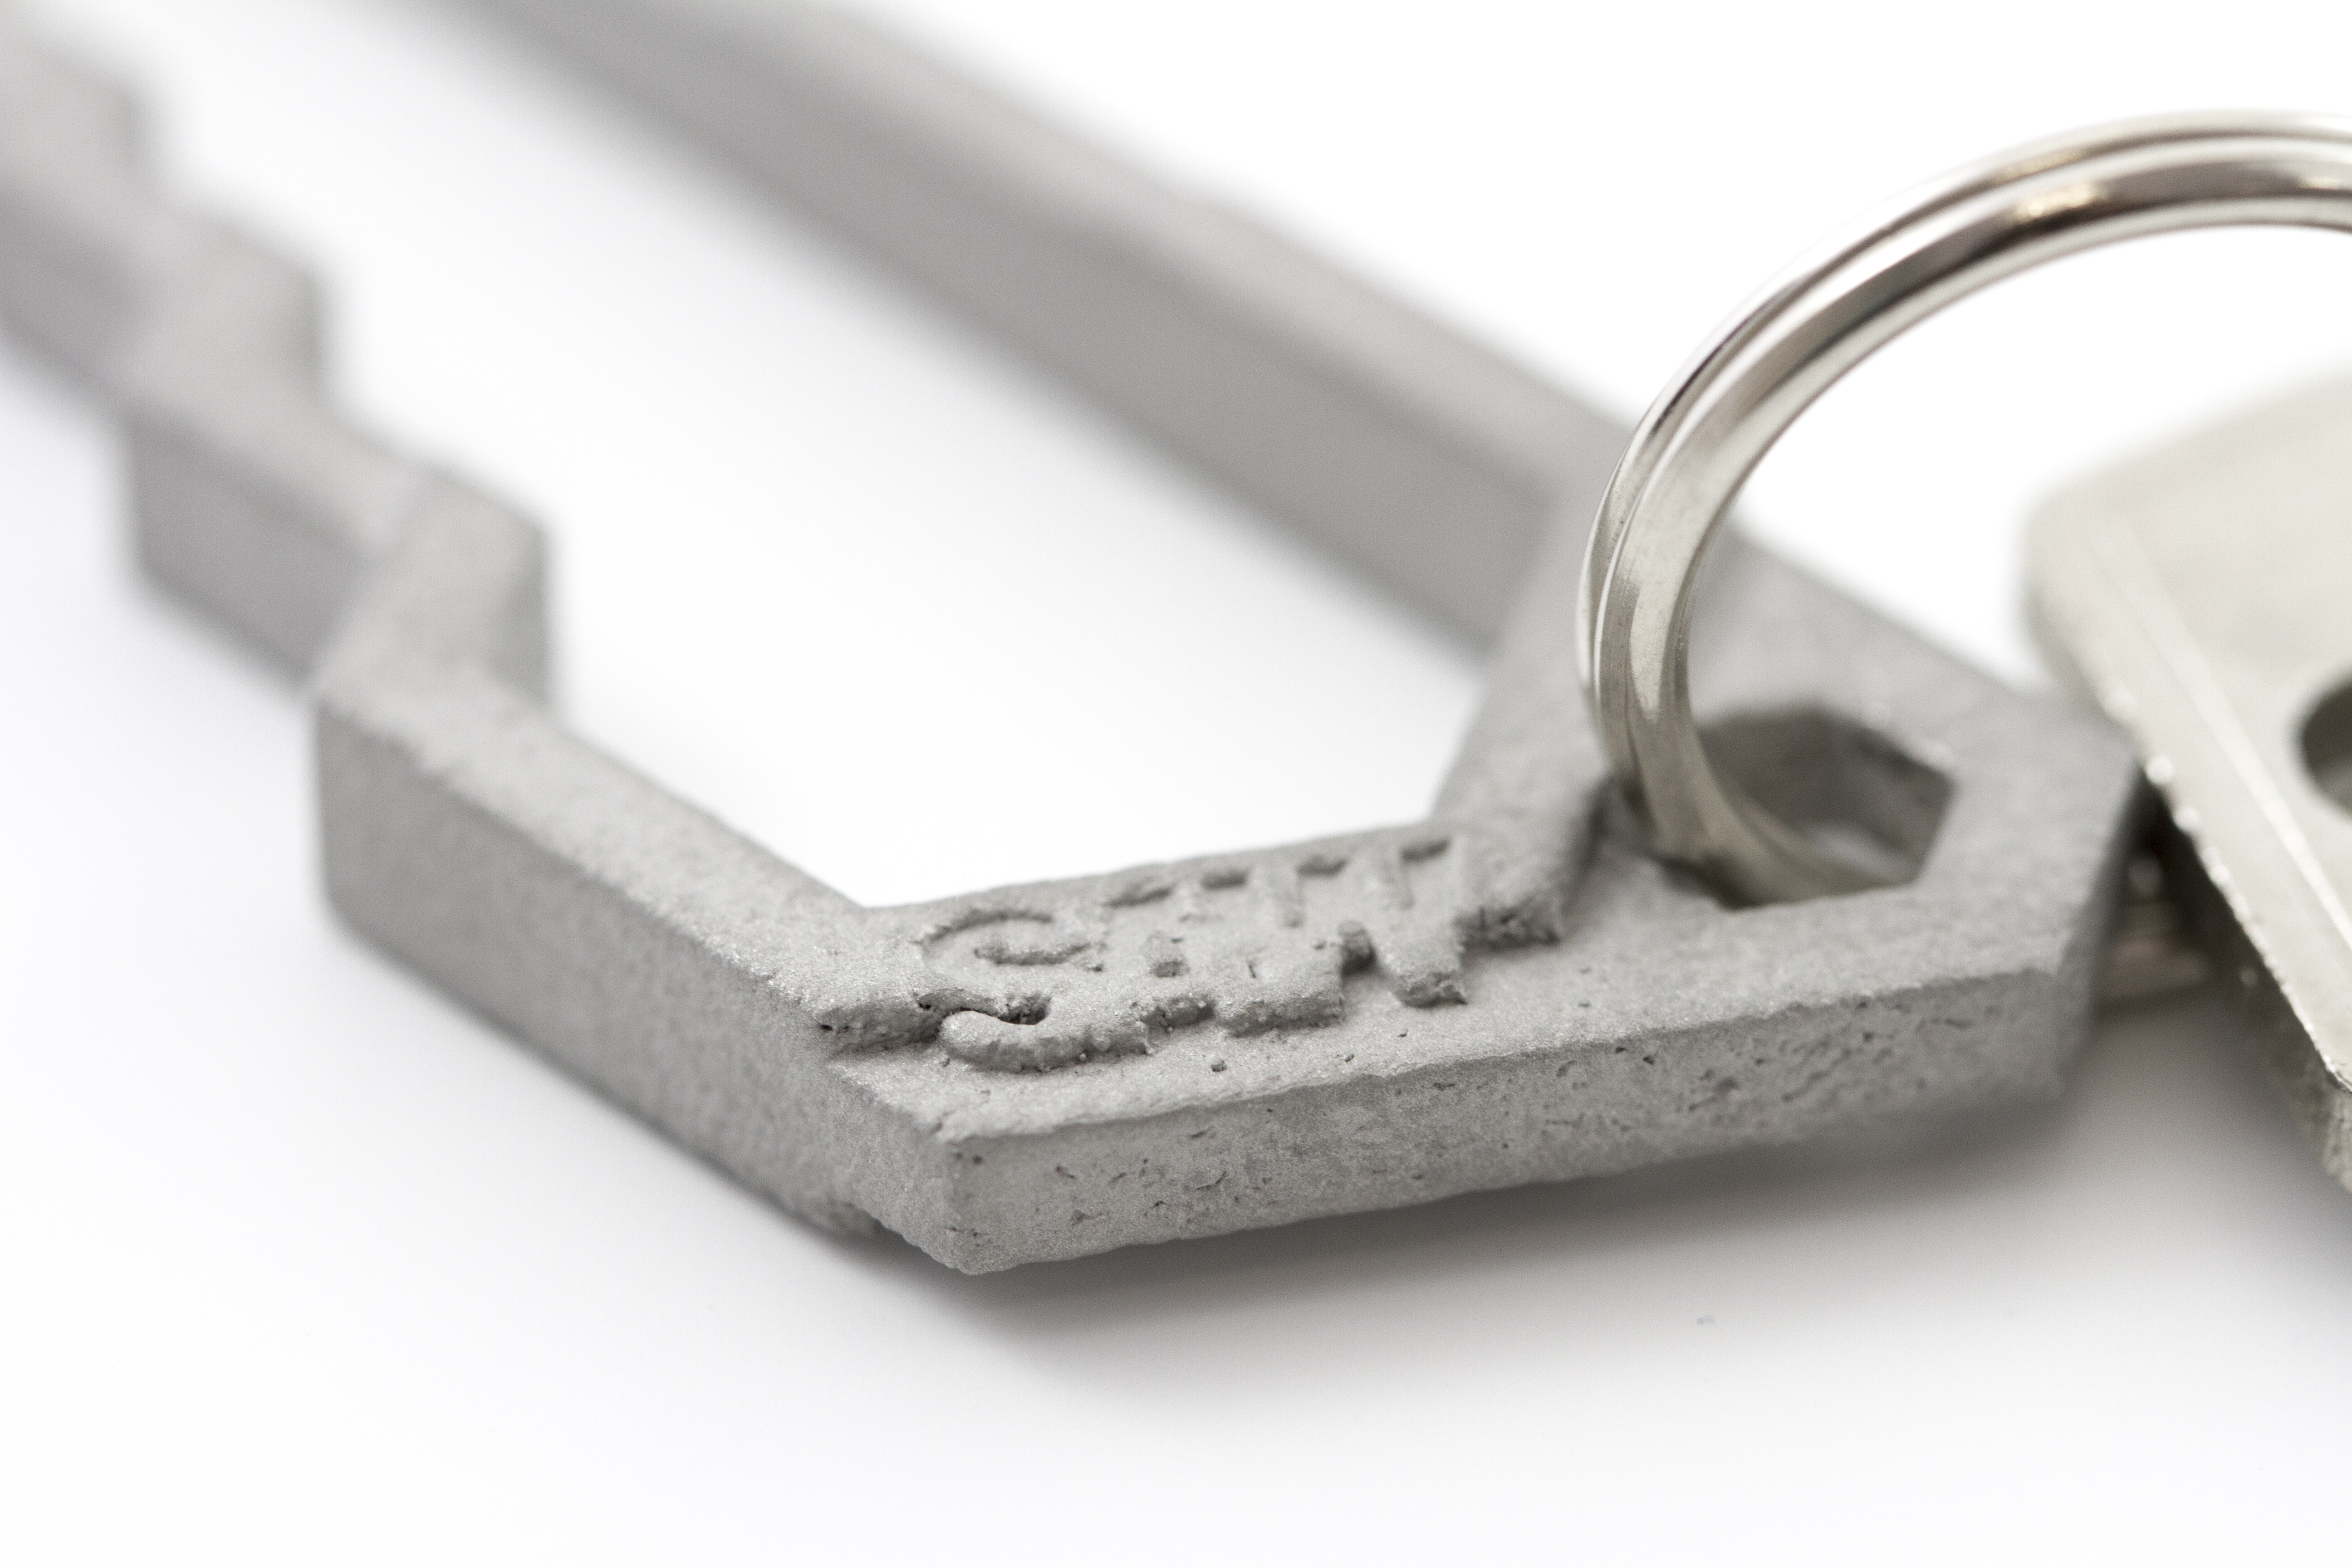 imaterialise aluminum 3d printing saw wrench by pekka salokannel  002